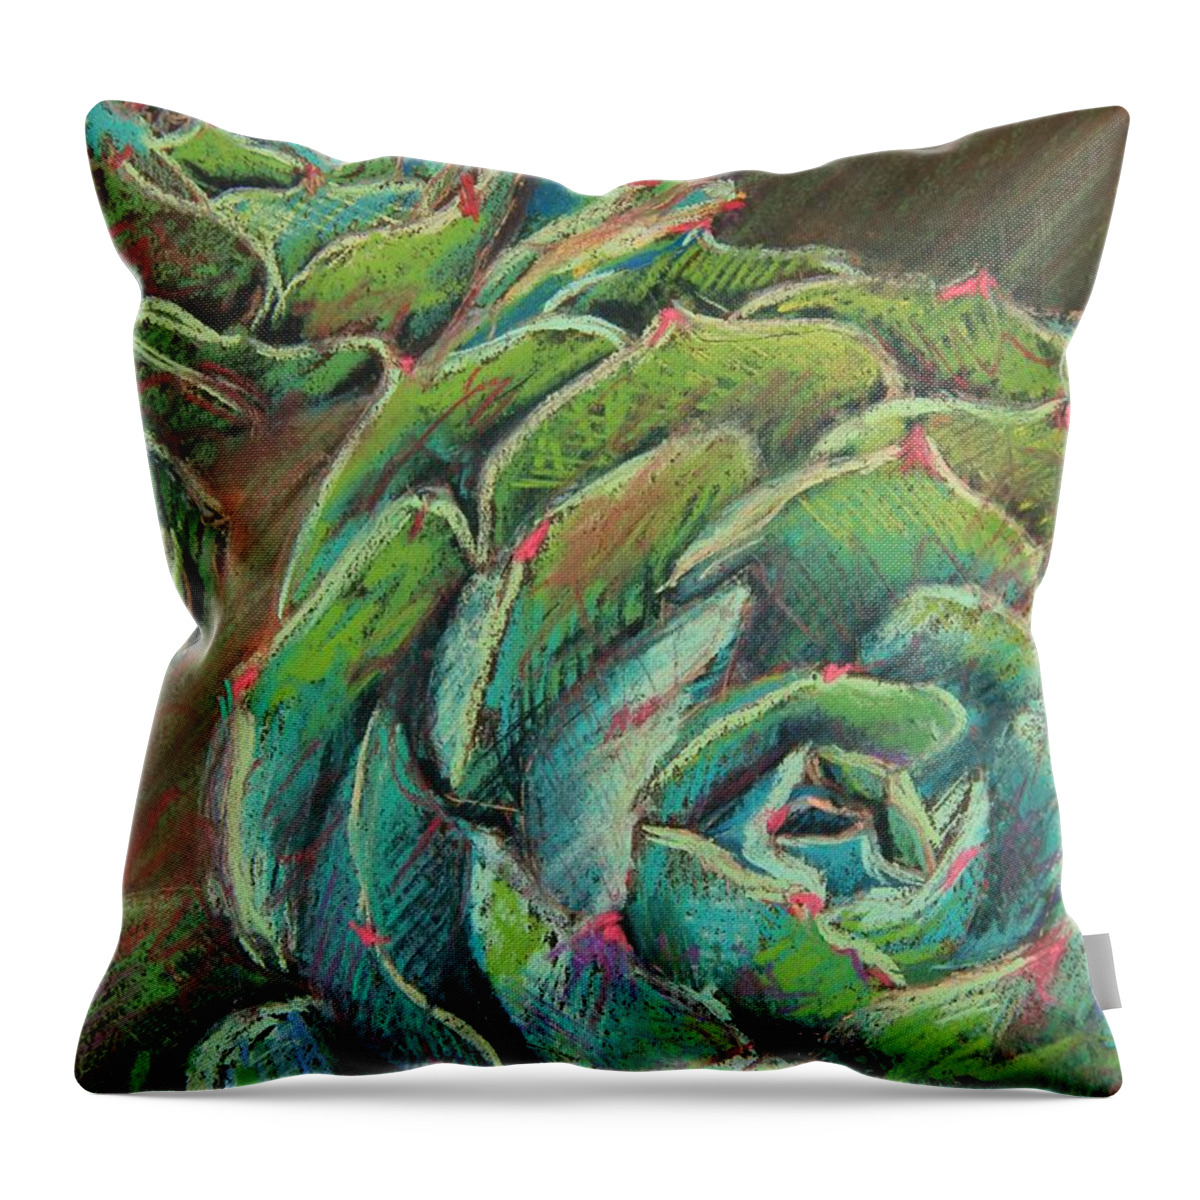 Echeveria Throw Pillow featuring the painting Green Echeveria by Athena Mantle